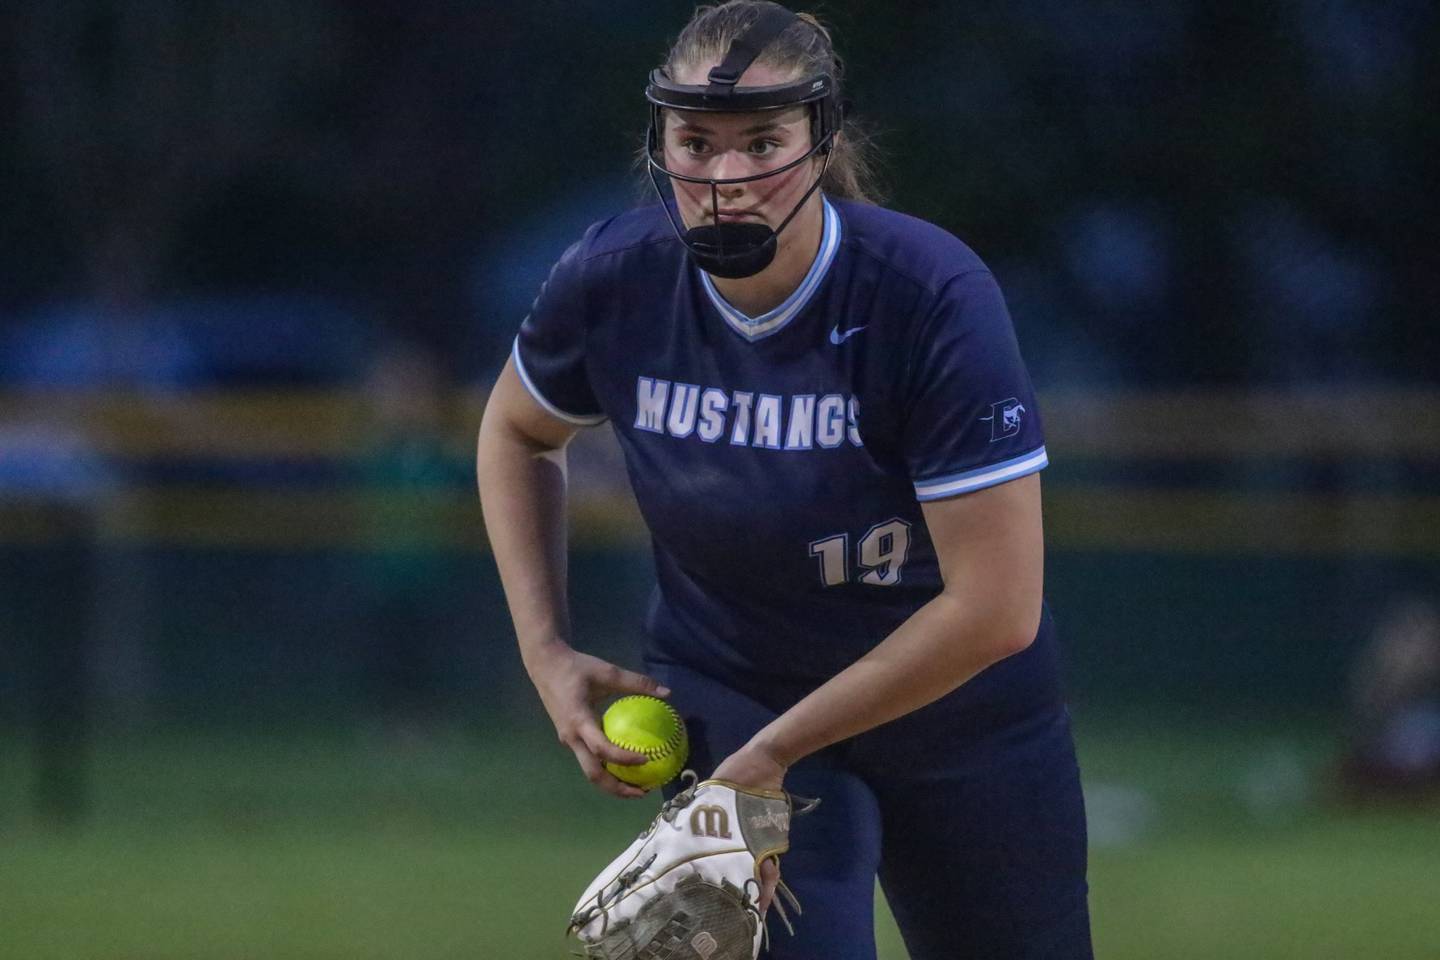 Downers Grove South's Ella Cushing (19) focuses on the plate during varsity softball game between Downers Grove South at Downers Grove North.  May 11, 2023.